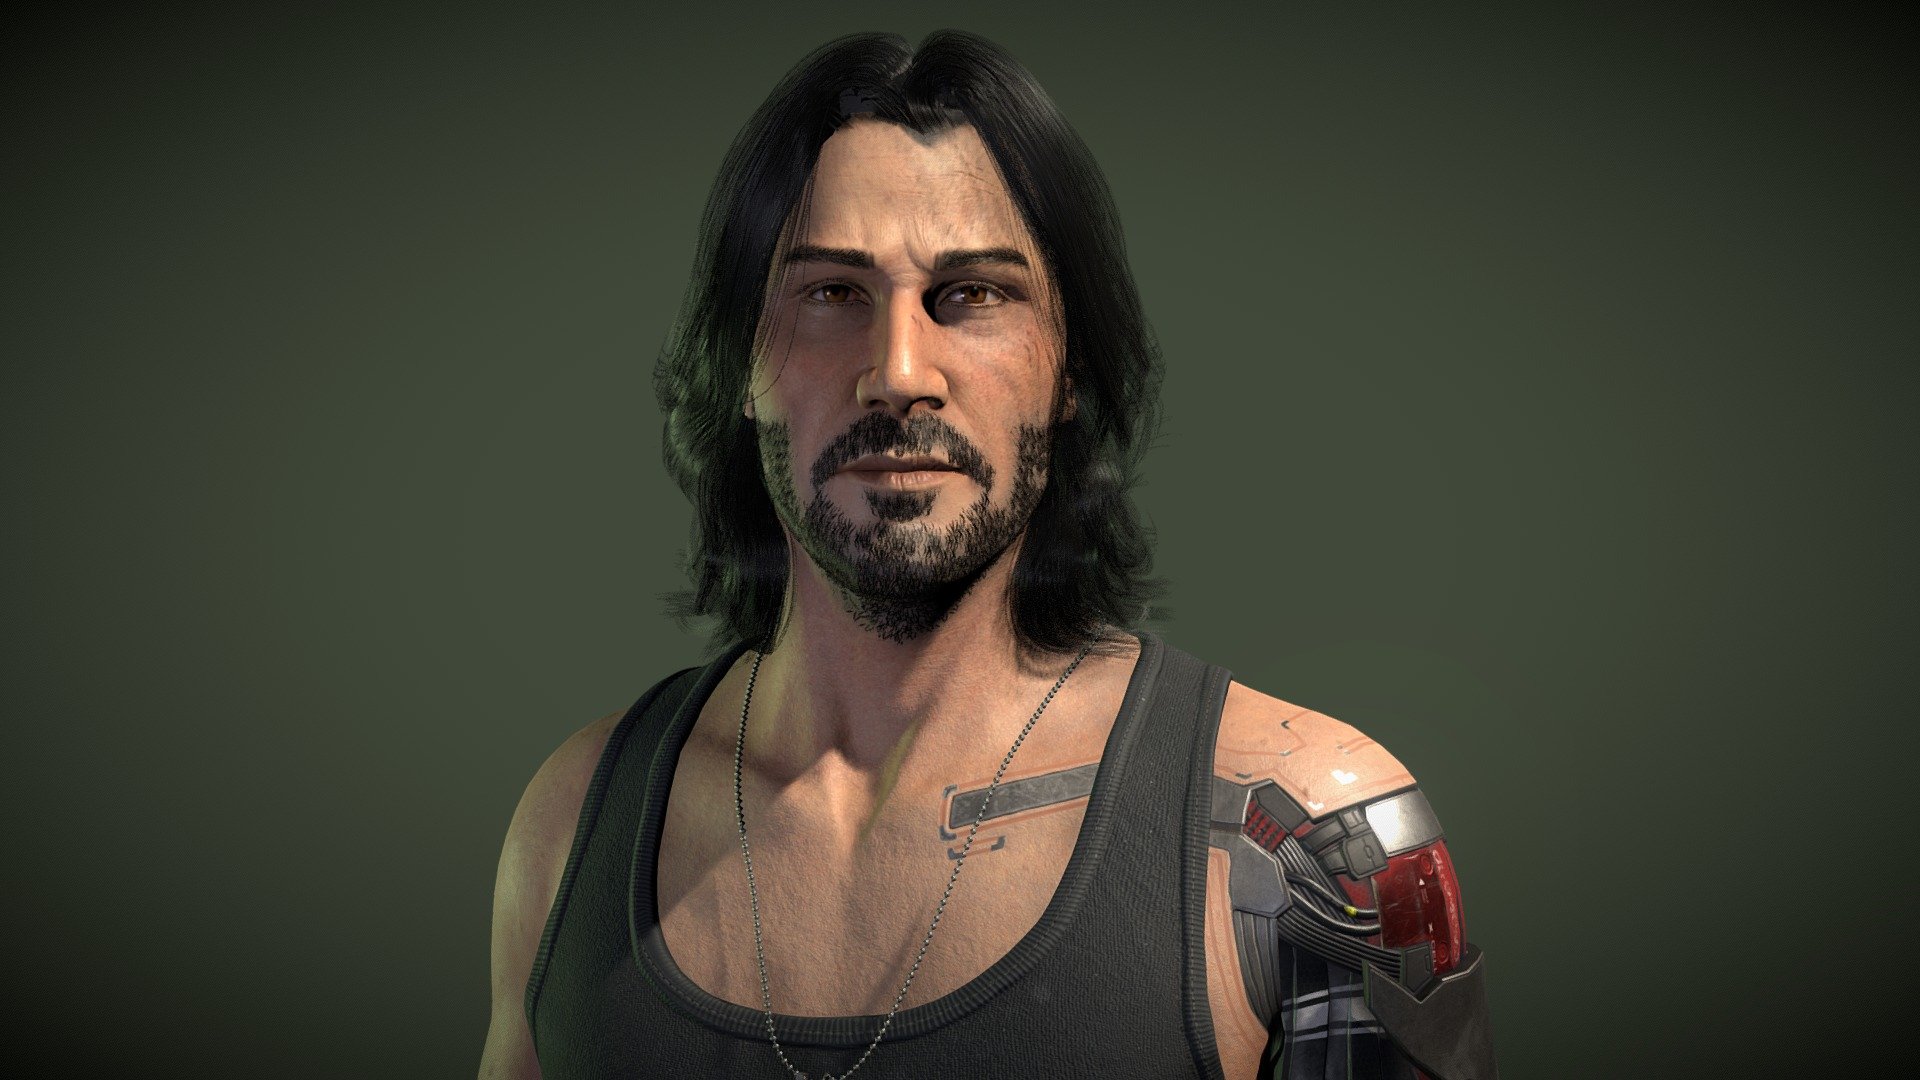 Realtime fanart of Johnny Silverhand (Keanu Reeves) from Cyberpunk 2077!

UE4 renders and technical breakdown on ArtStation  ↓ 




The goal of this project was to recreate Johnny, matching the art style of the original game and capturing the likeness of Keanu.
My inspiration behind making this project was being a big fan of Johnny (and also of Keanu) and wanting to make a character that would really push my abilities in the creation of skin, hair, clothing and hard surface.
Made as part of my final major project for my degree in computer games art.

Software used: Zbrush, Maya, Substance Painter - Johnny Silverhand - Cyberpunk 2077 Fanart - 3D model by Tristan McGuire (@Draconic_Cowboy) 3d model